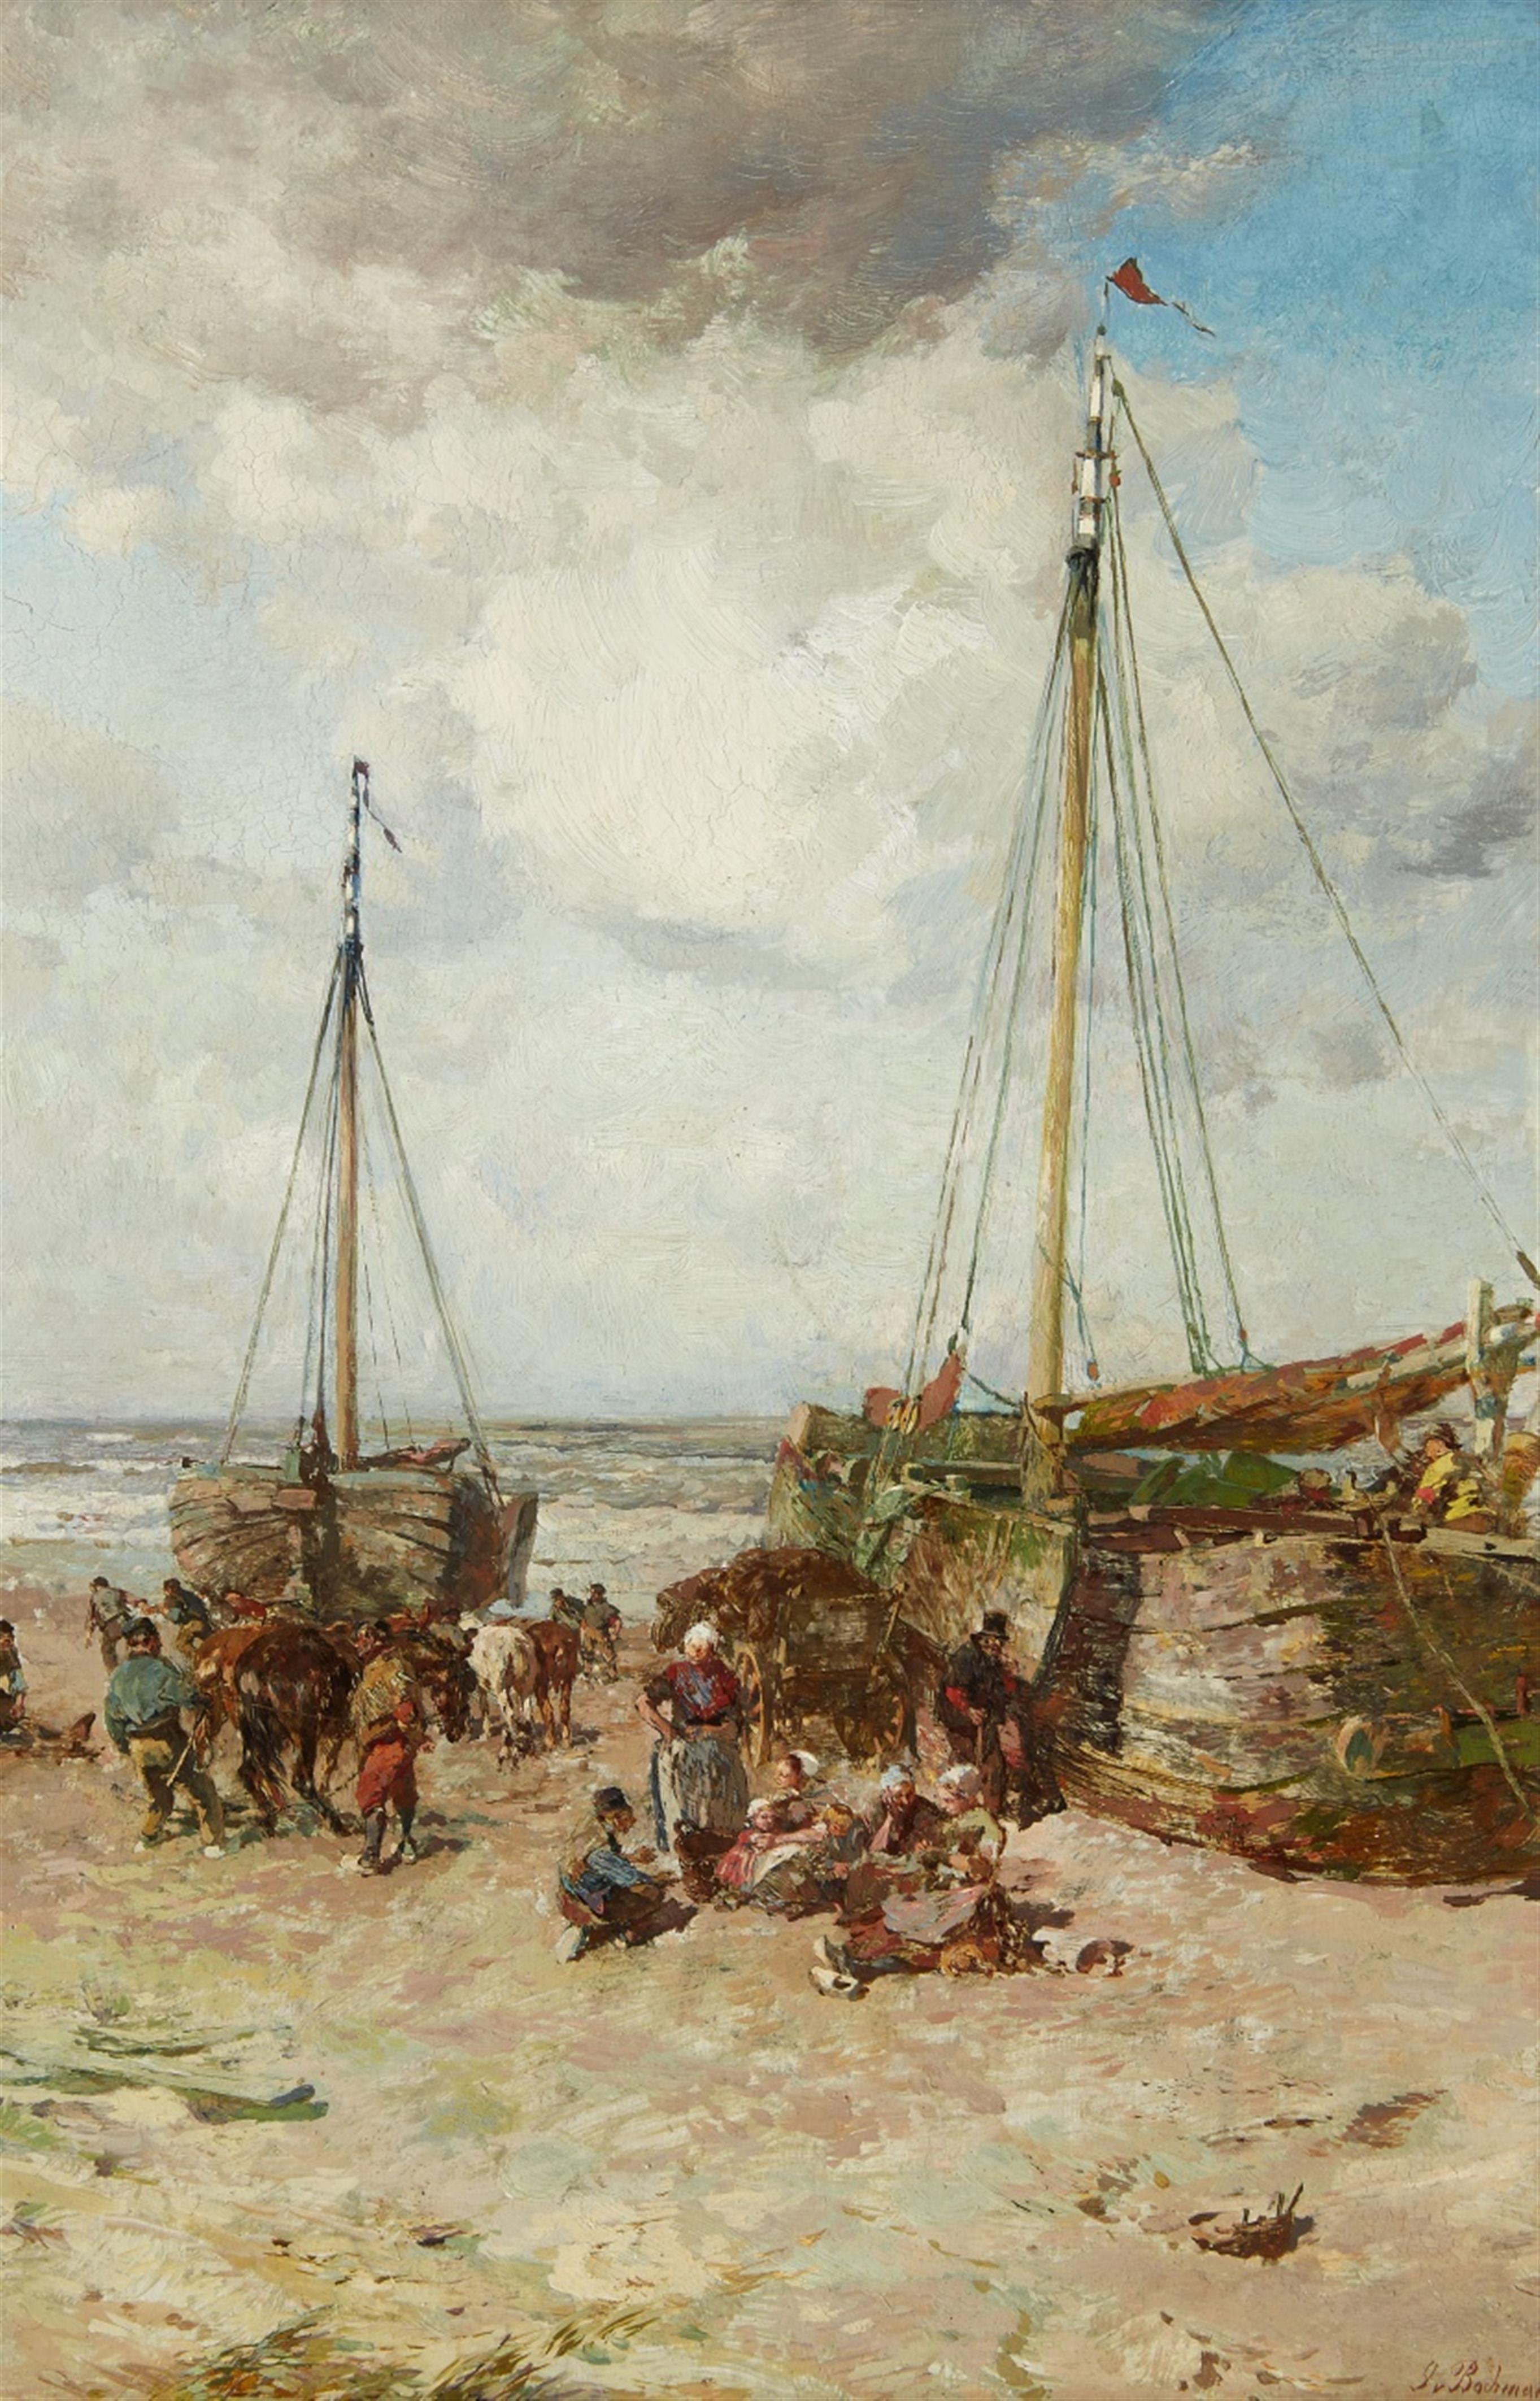 Gregor von Bochmann - A Beach Scene with Fishers and Sailing Boats - image-1